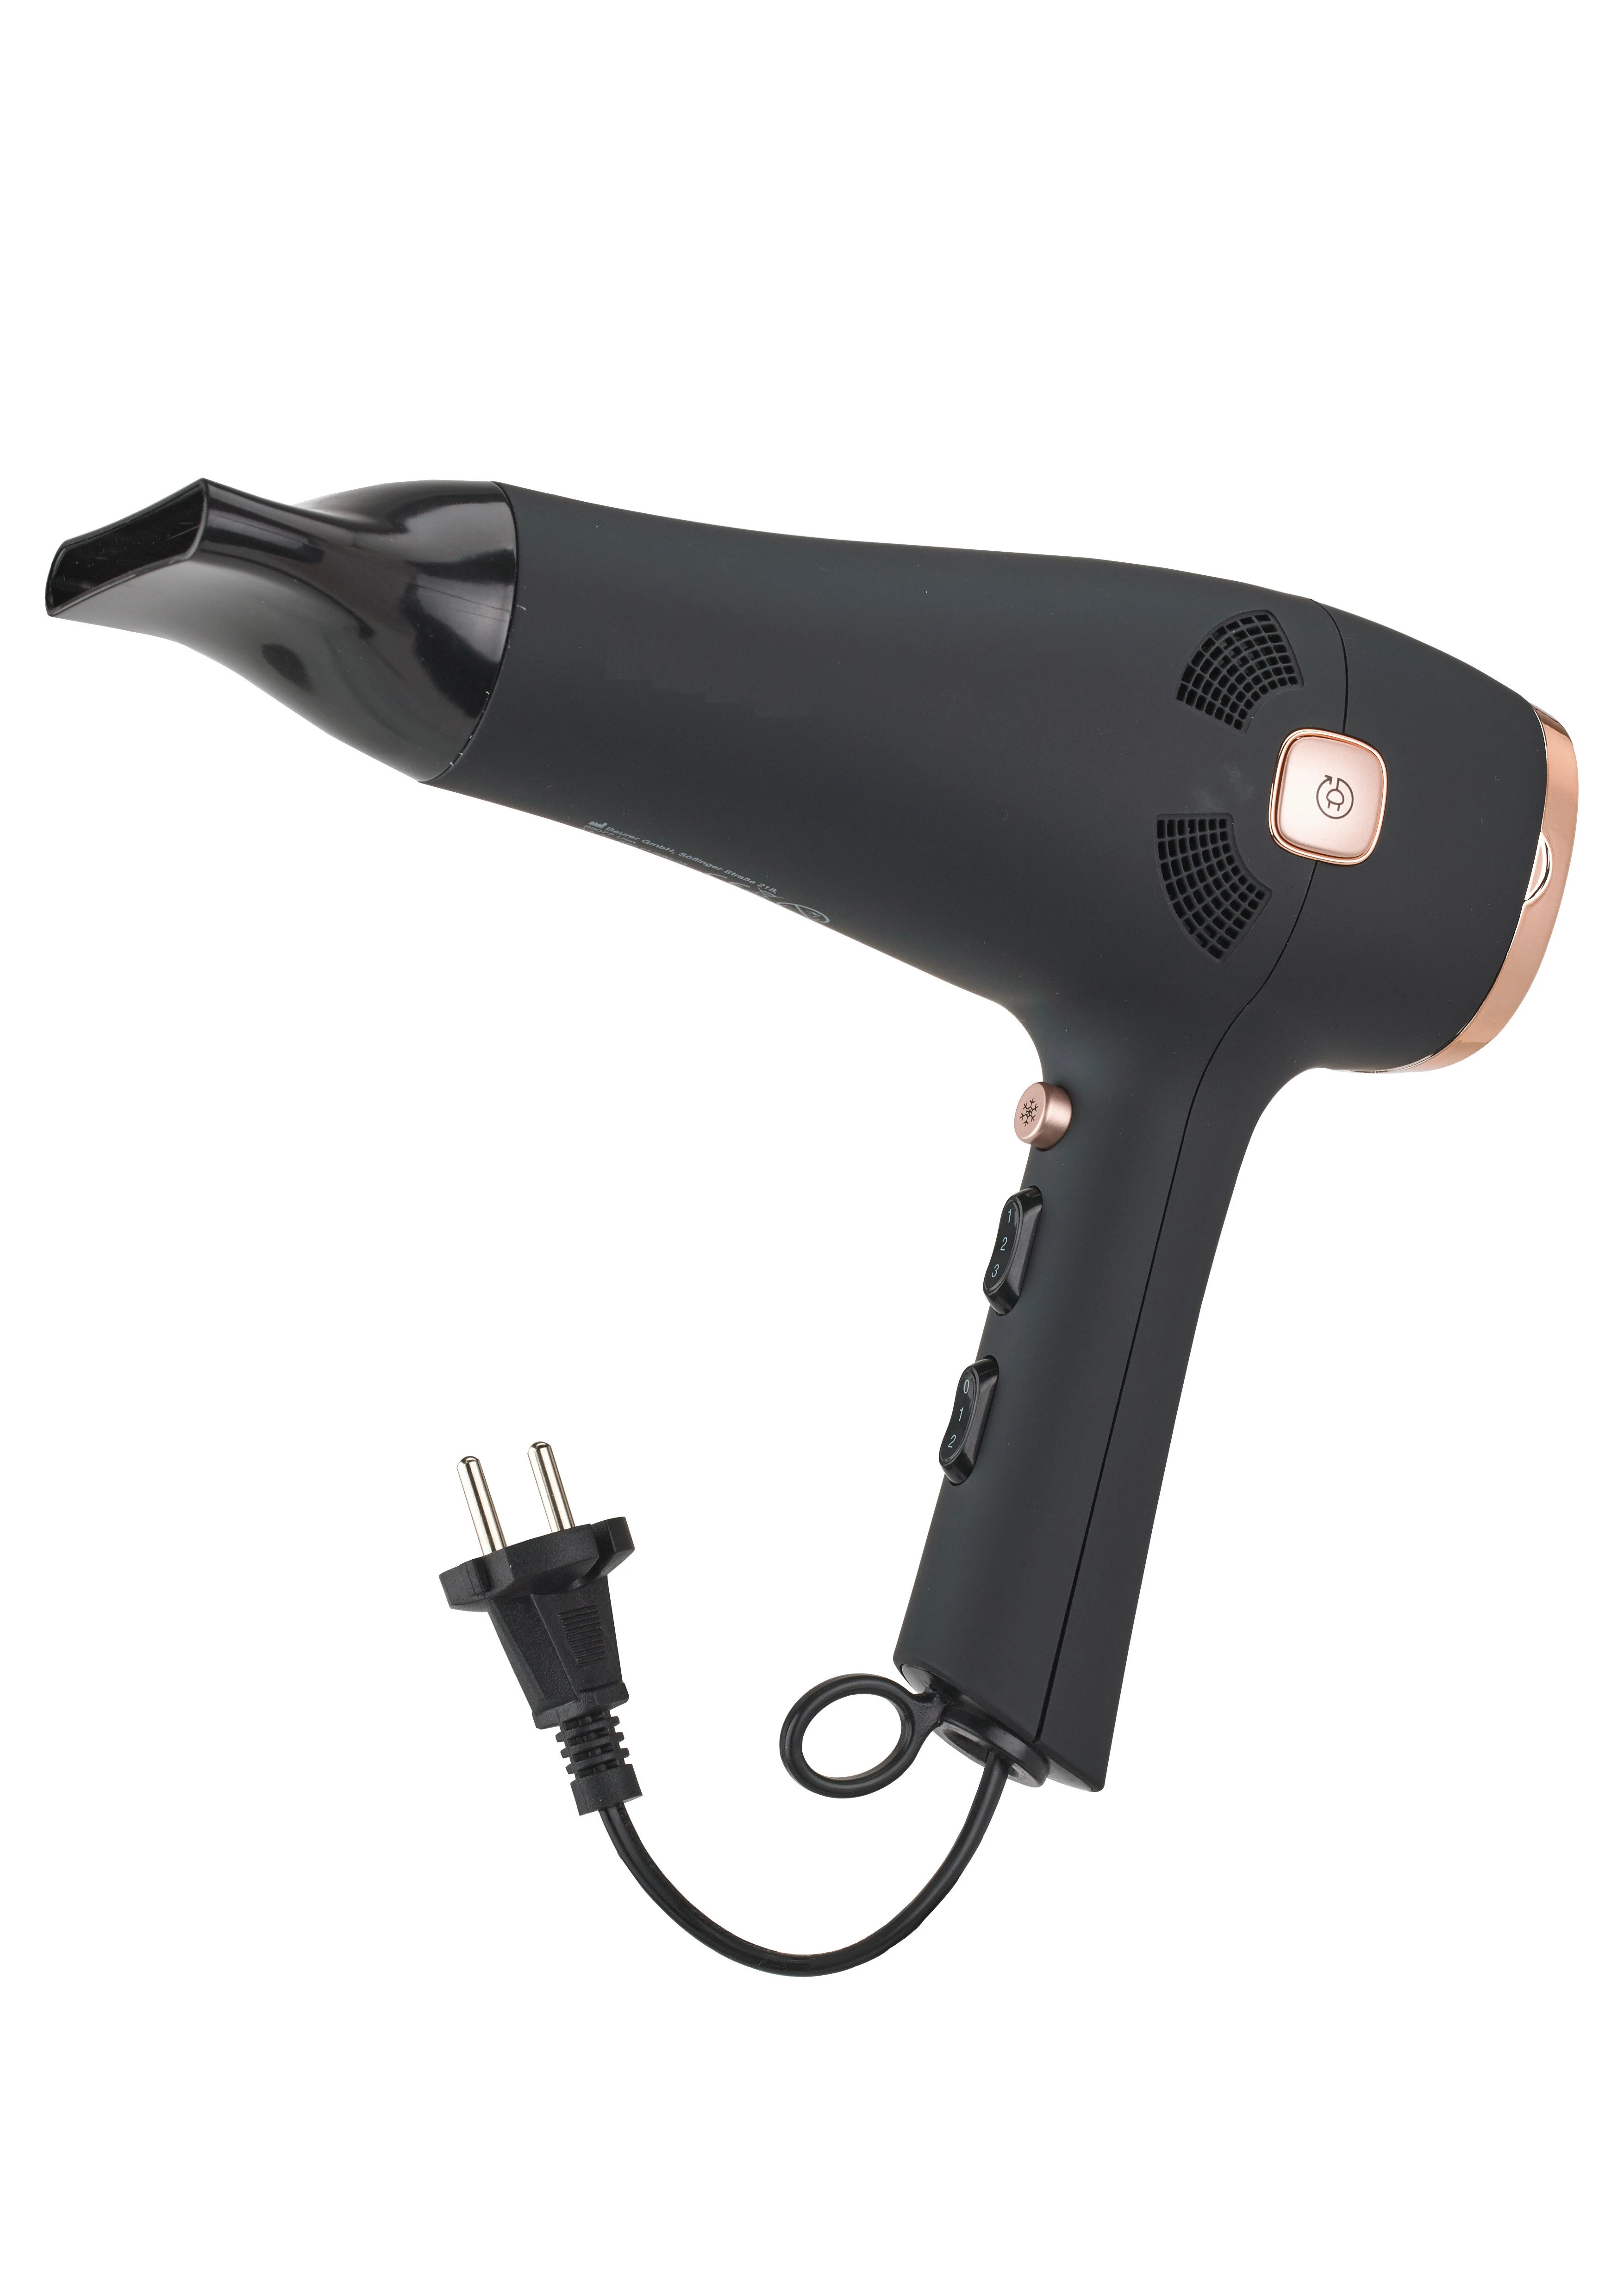 Hot selling  retractable cord professional hair dryer below dryer with ionic function